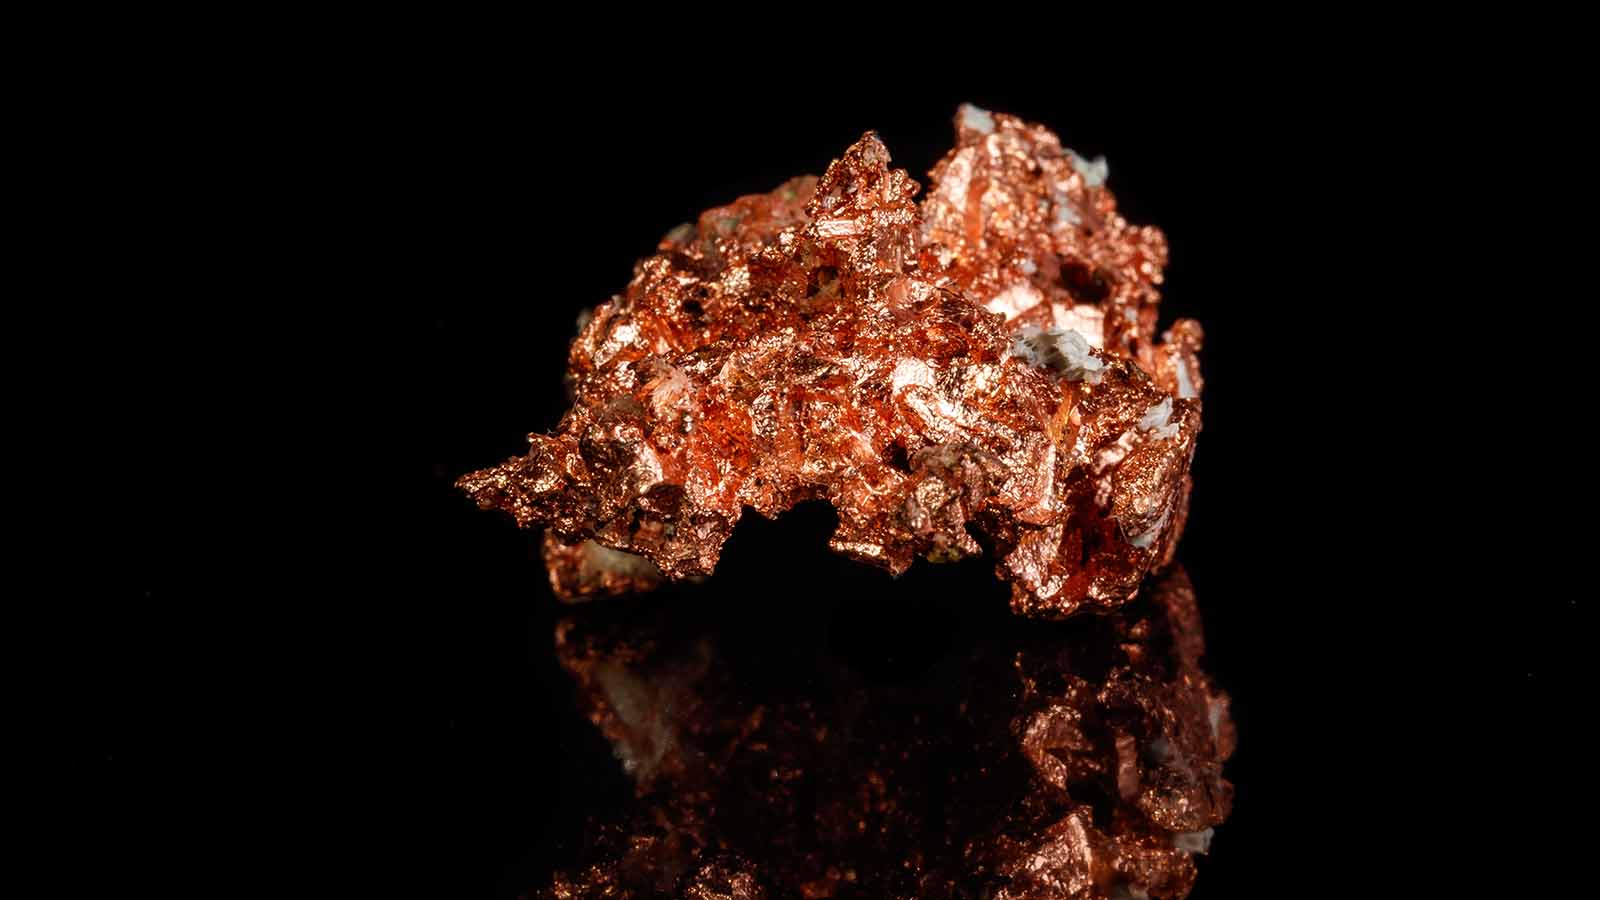 Northern Dynasty Minerals Stock Is a Speculative Bet - Investorplace.com